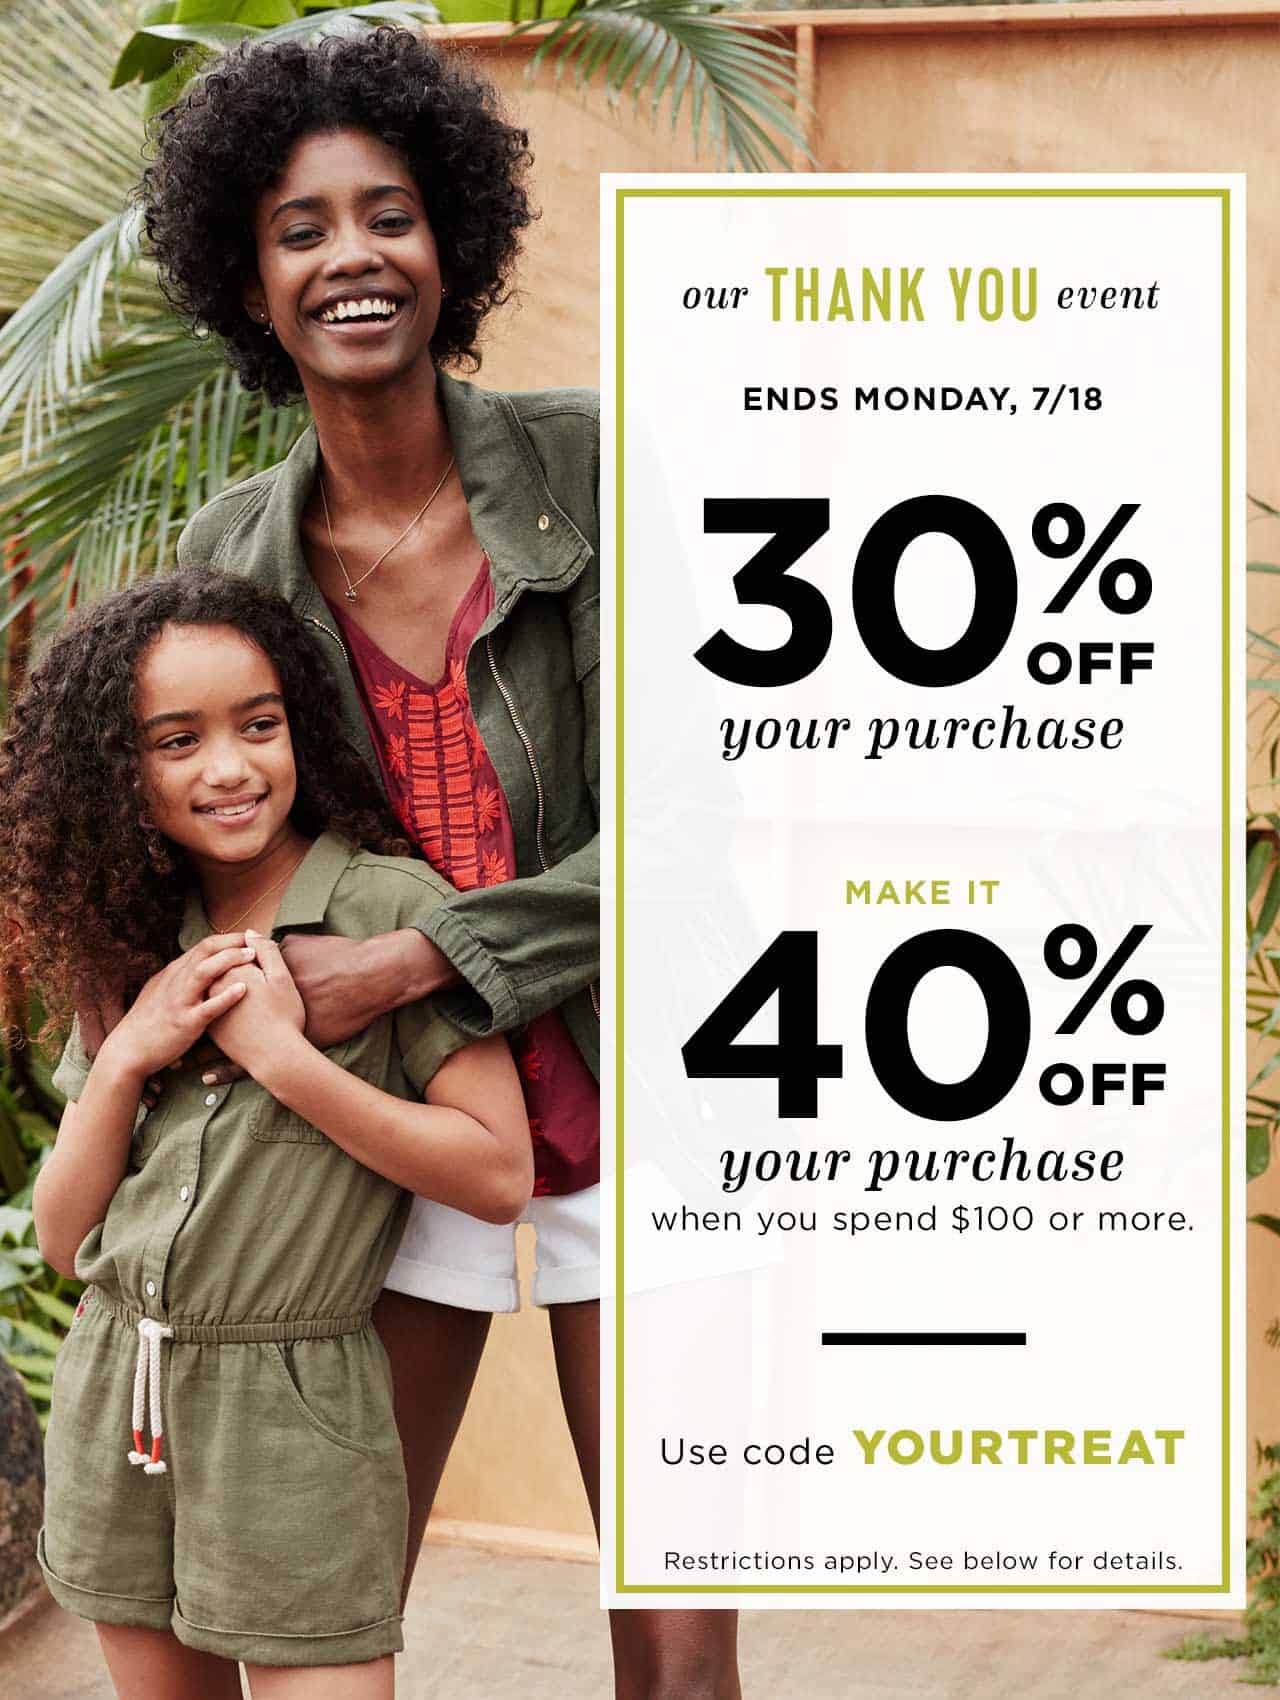 Old Navy Coupon Code: Save up to 40% off